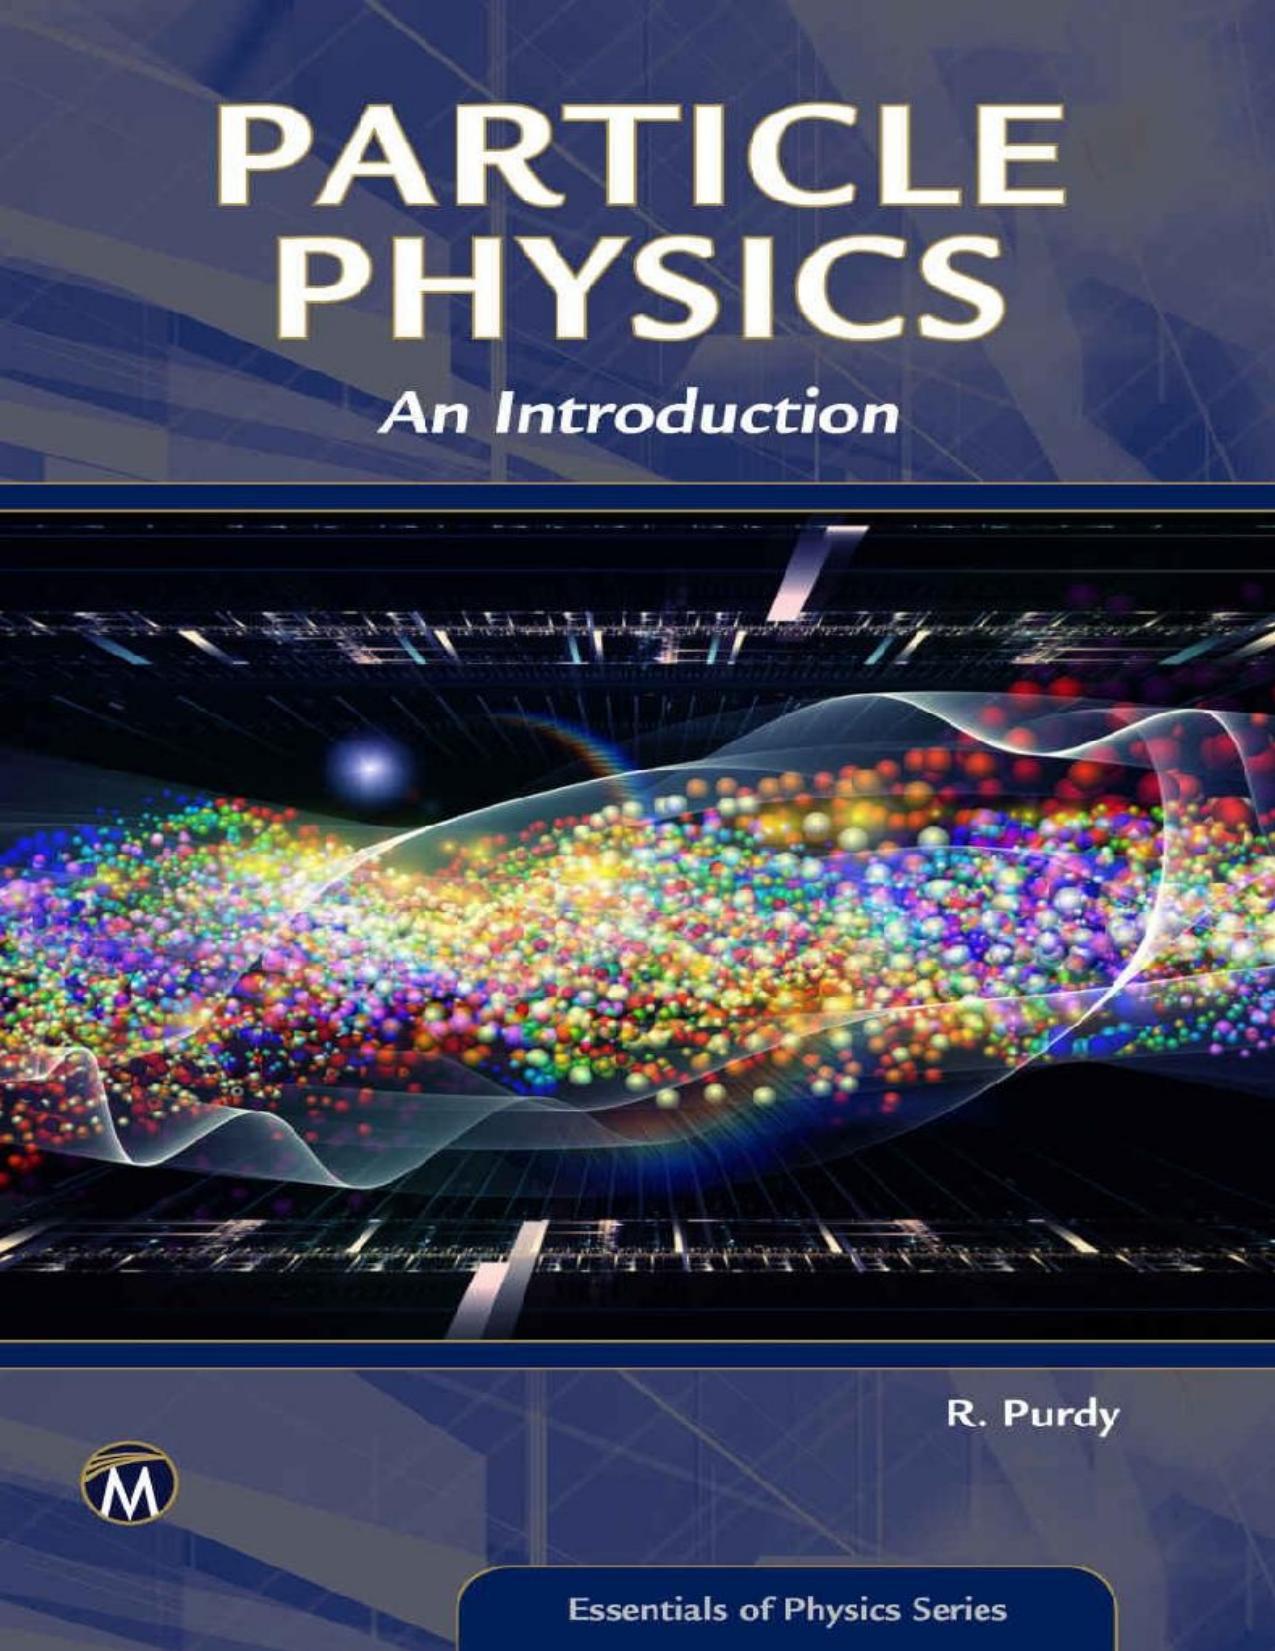 Particle Physics: An Introduction - PDFDrive.com